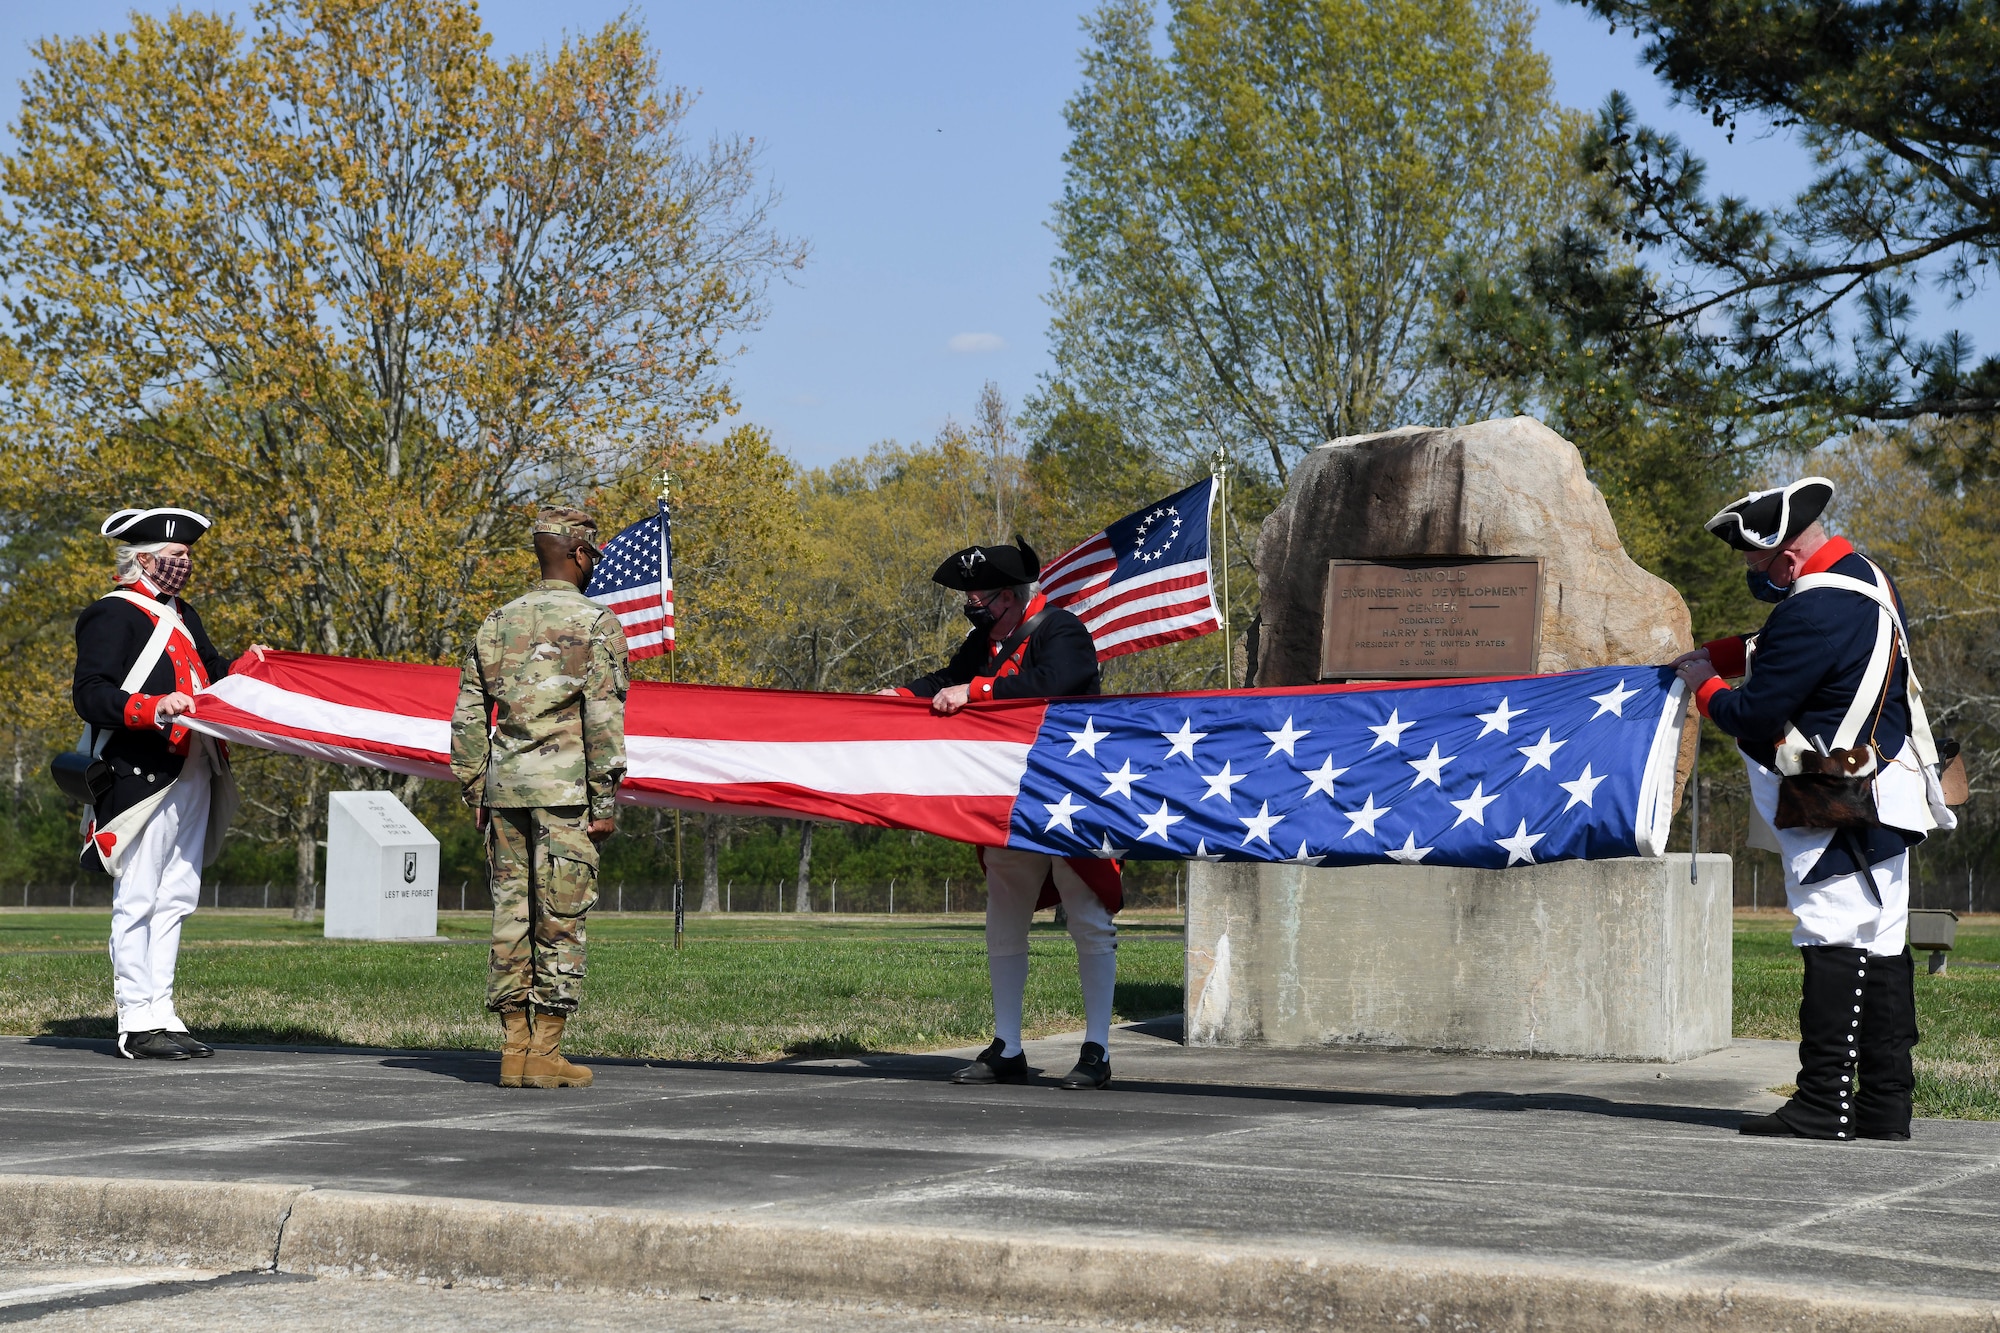 Master Sgt. Don Wilson, assists members of the Tennessee Society of the Sons of the American Revolution, from left, Doug Dickerson, Jerry Hjellum and Cliff Kent, fold the flag during a flag retreat ceremony held to mark the end of Extremism Stand Down exercises, April 6, 2021, at Arnold Air Force Base, Tenn. (U.S. Air Force photo by Jill Pickett)